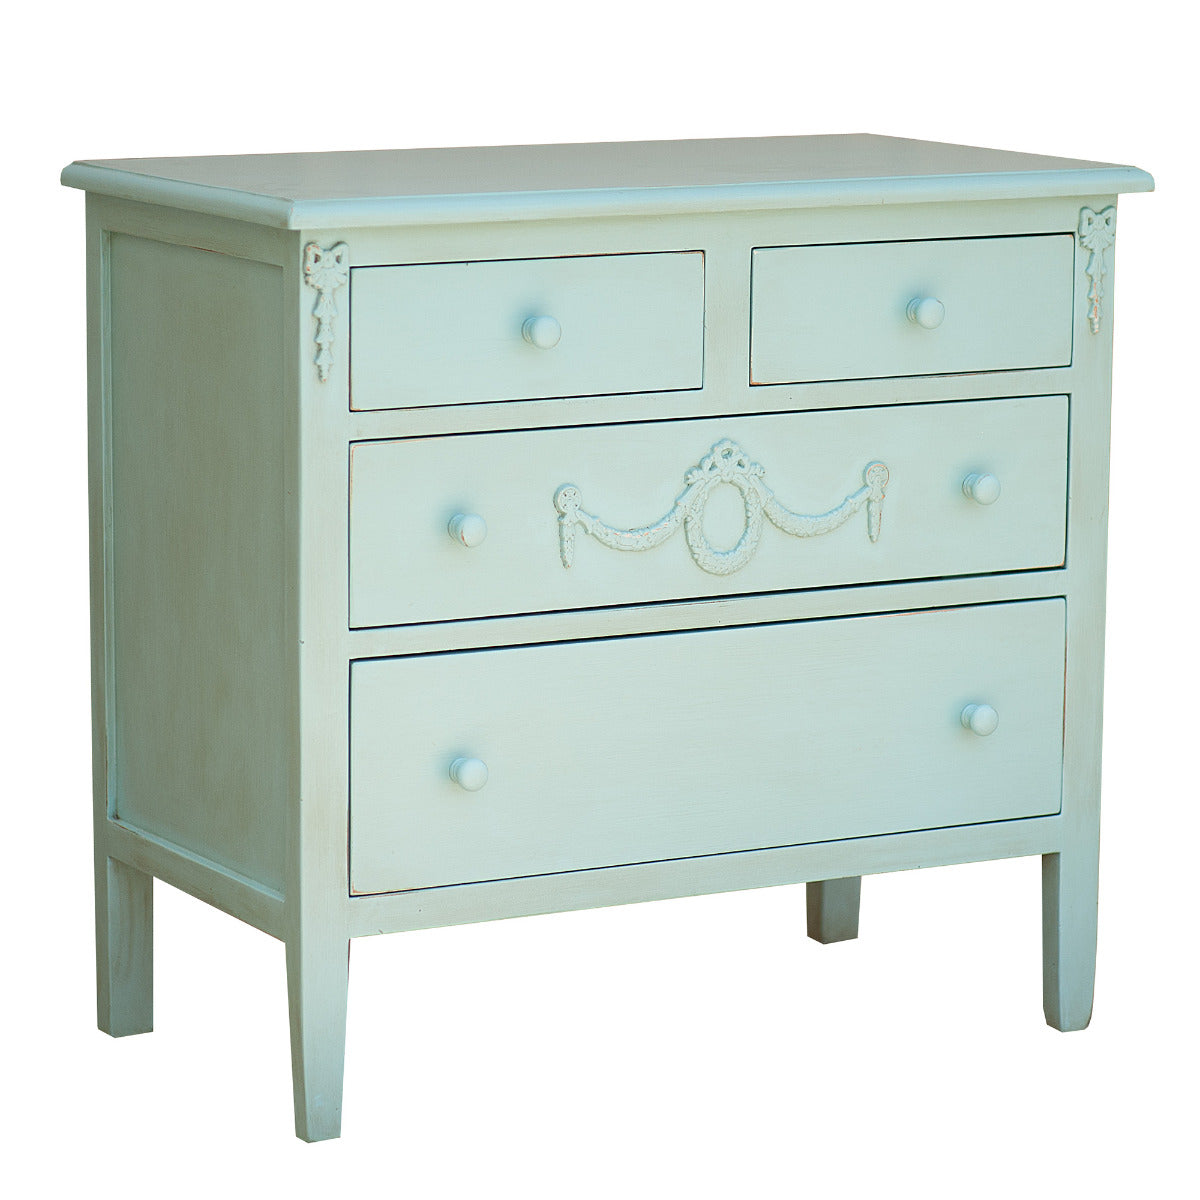 Alice's Scalloped Dresser – THE BEAUTIFUL BED COMPANY